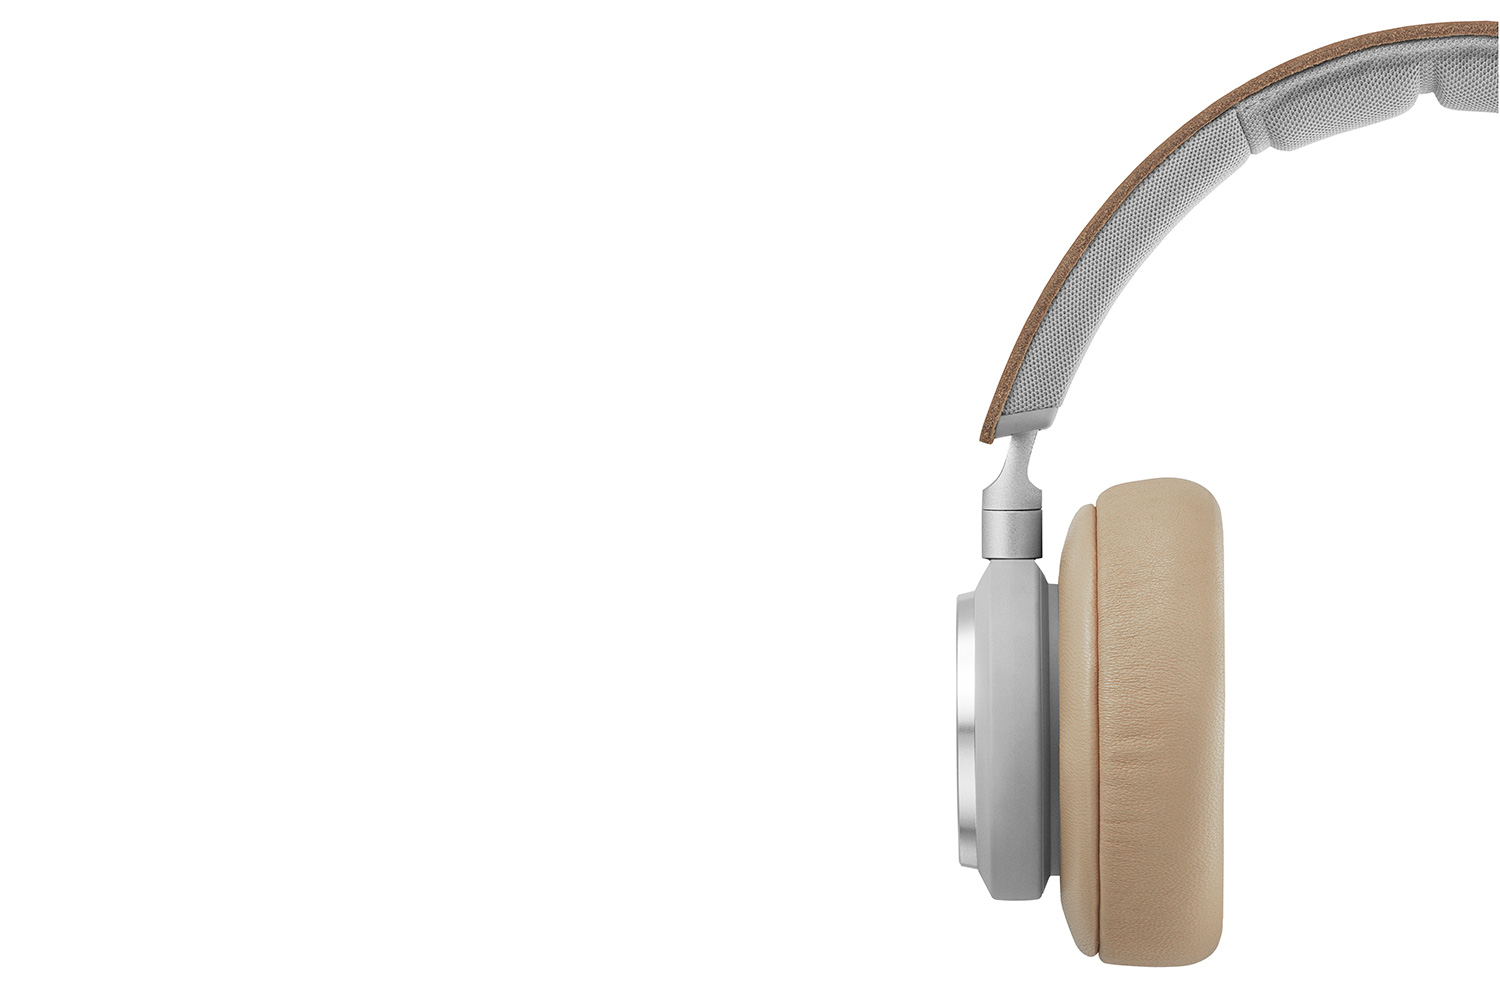 bang olufsen h7 headphones video review b o beoplay 0016